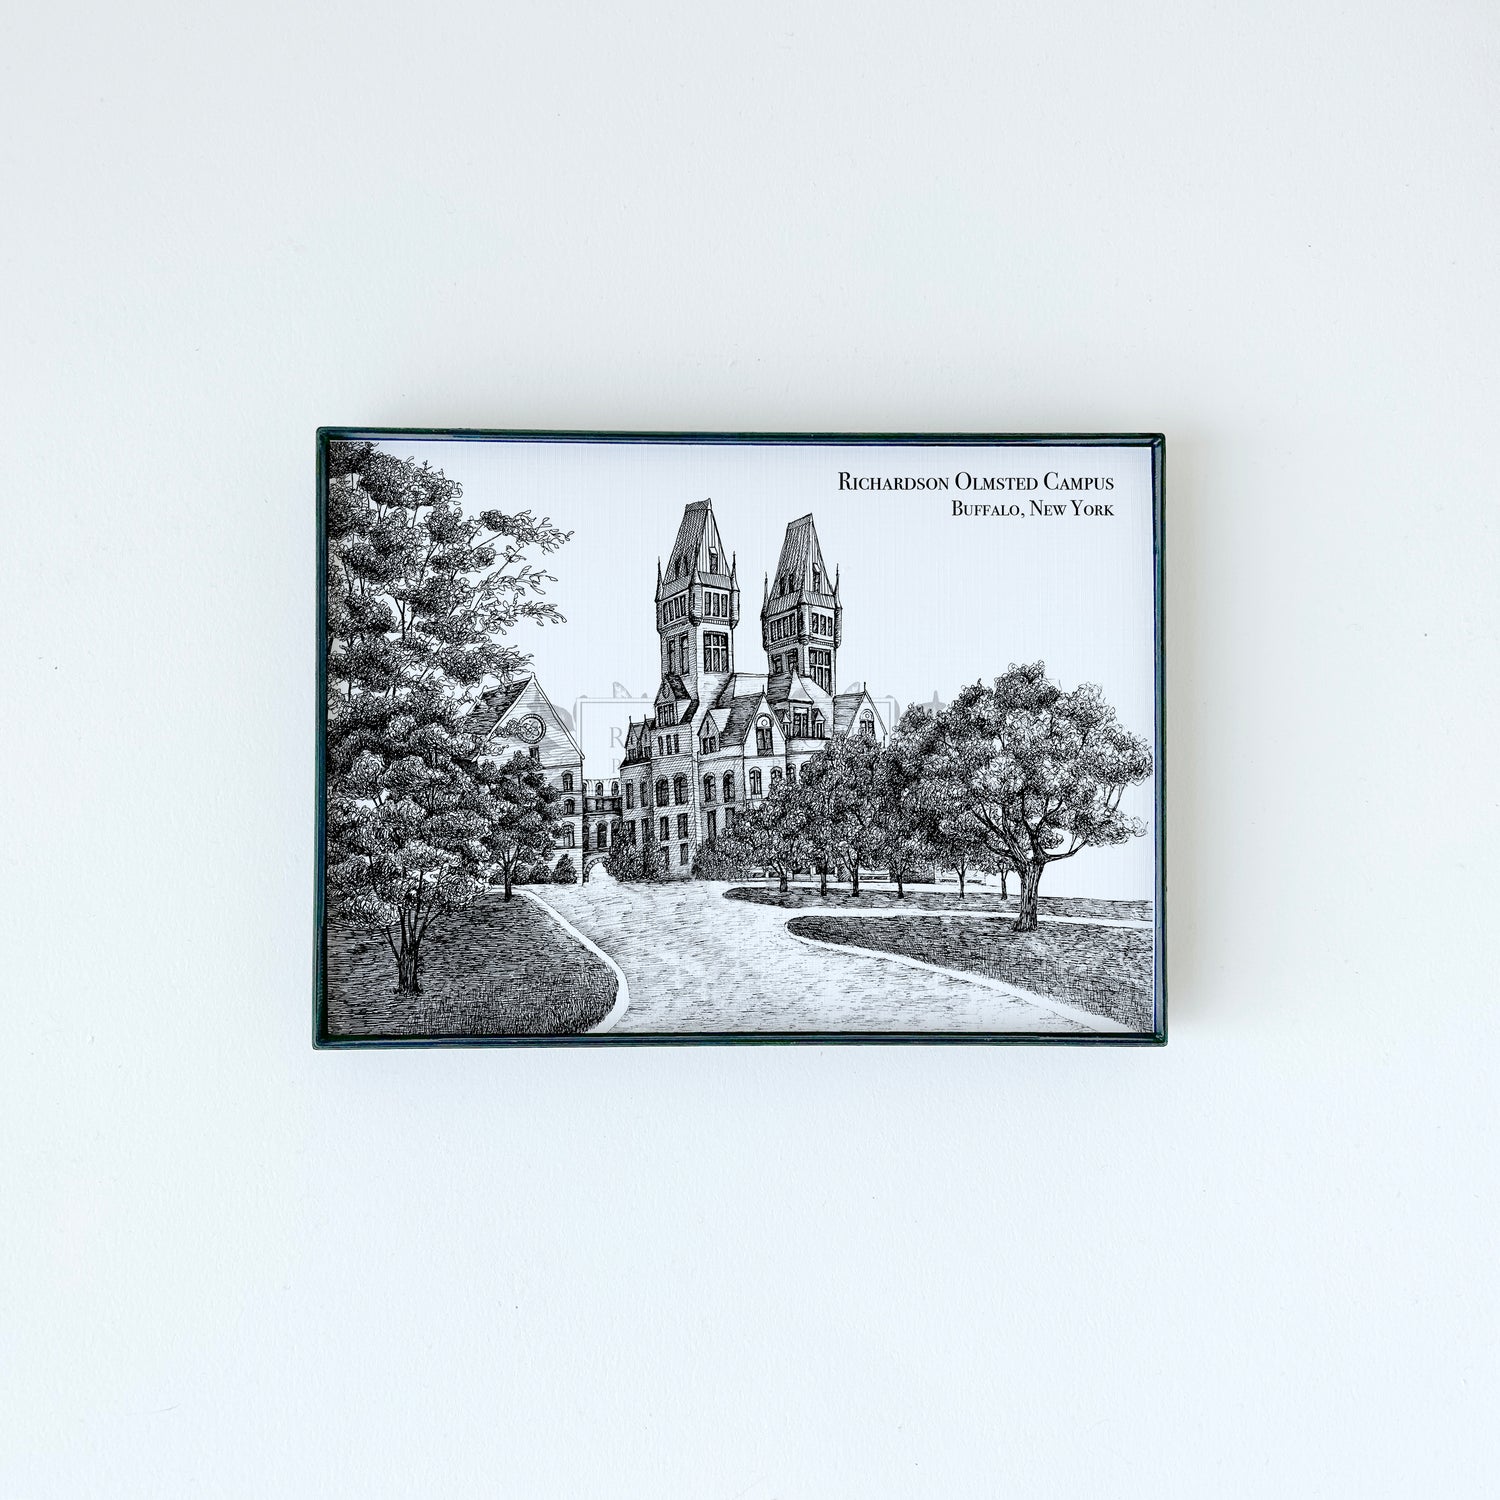 Richardson Olmsted Campus illustration in black ink on white paper by Rust Belt Love